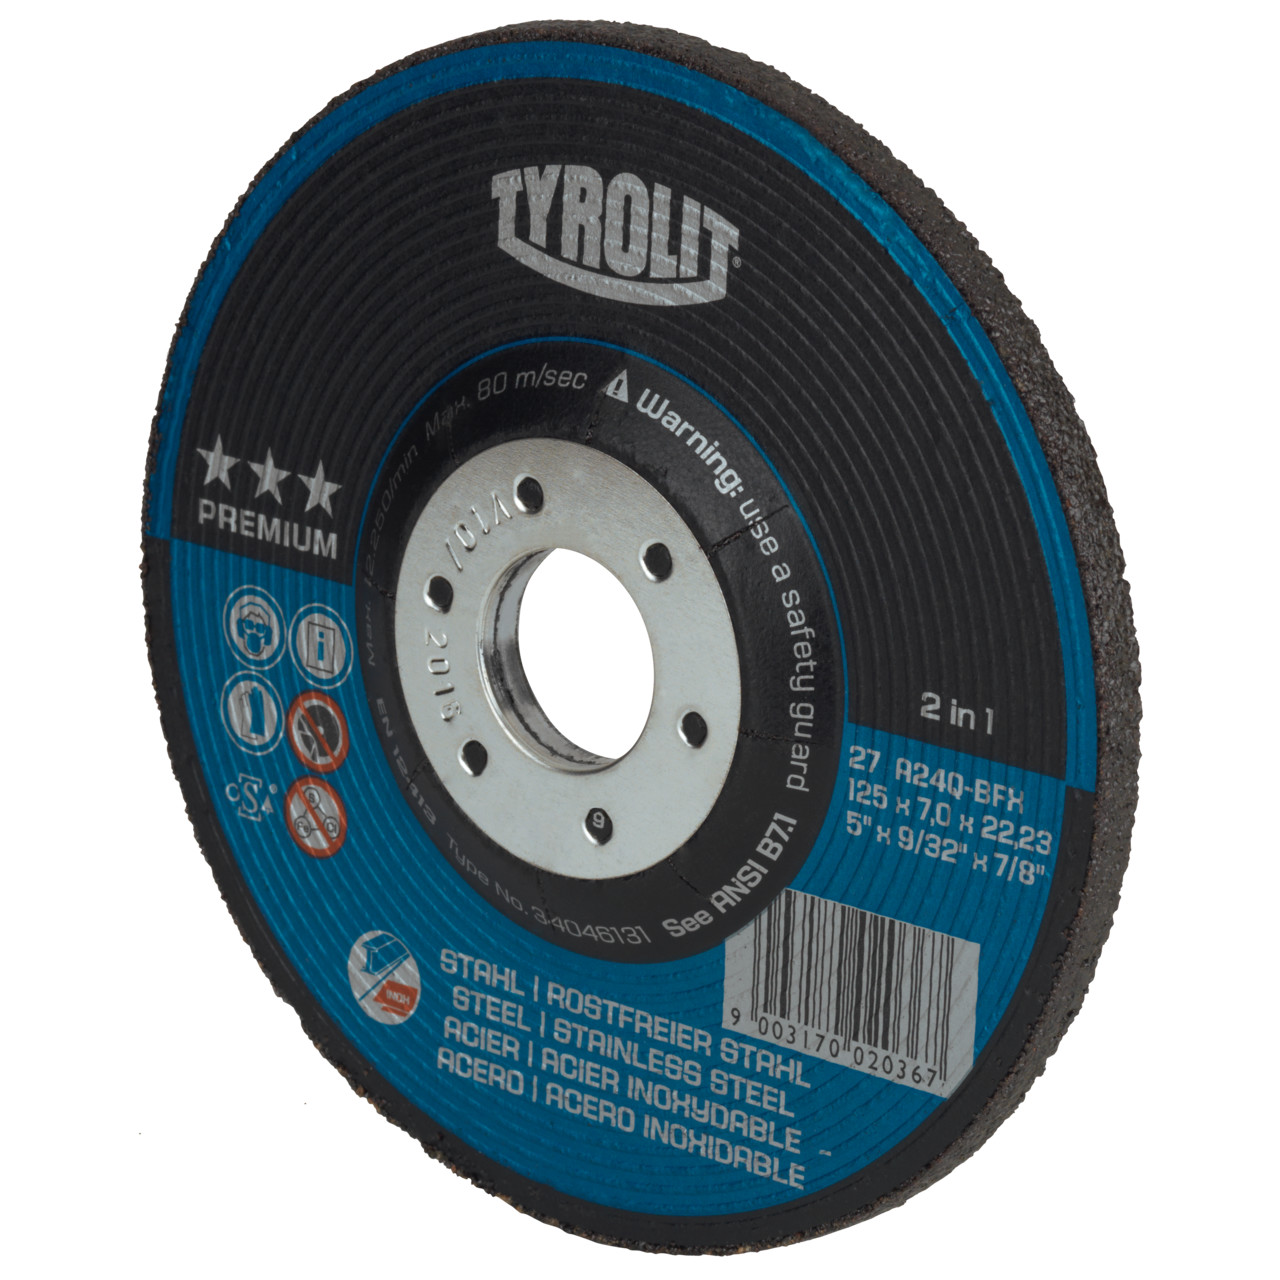 Tyrolit Roughing disc DxUxH 230x8x22.23 2in1 for steel and stainless steel, shape: 27 - offset version, Art. 34046136